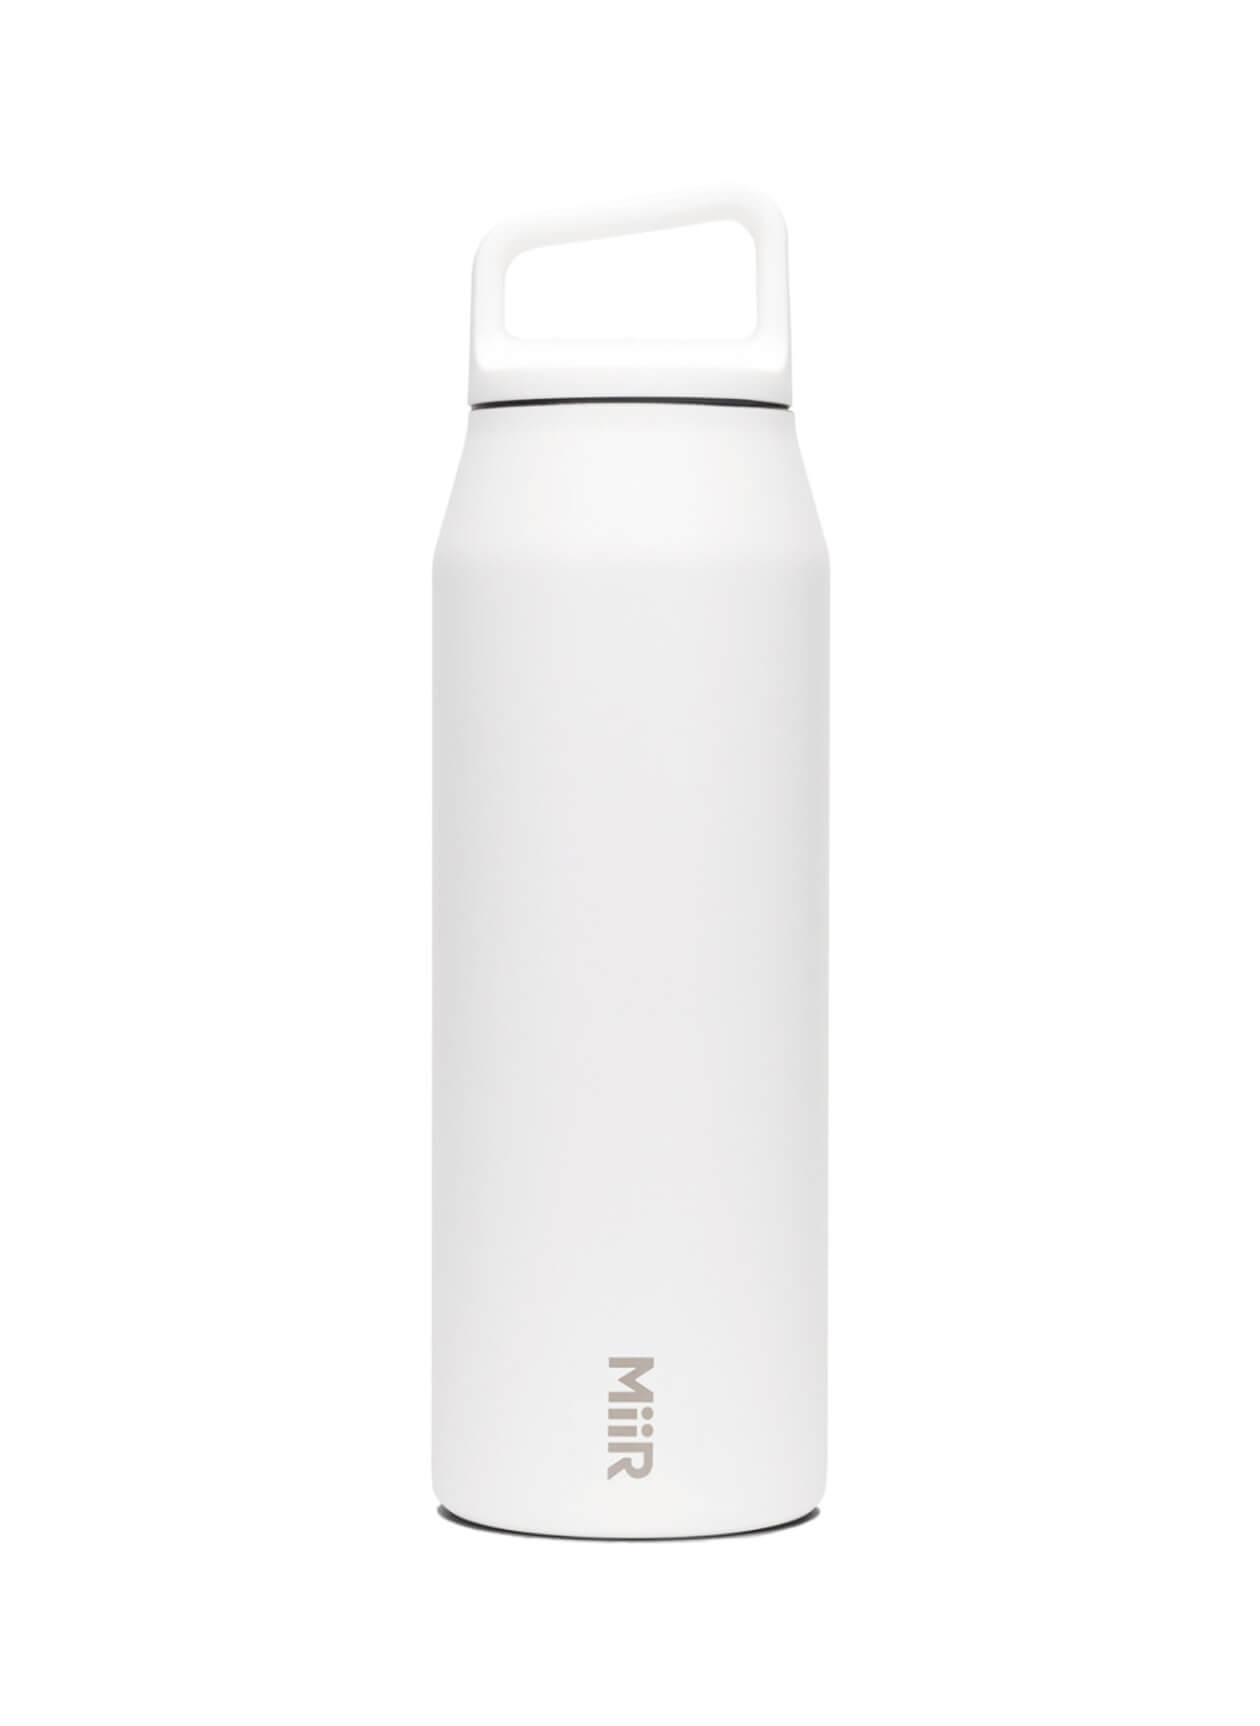 Miir White Powder Vacuum Insulated Wide Mouth Bottle - 32 oz